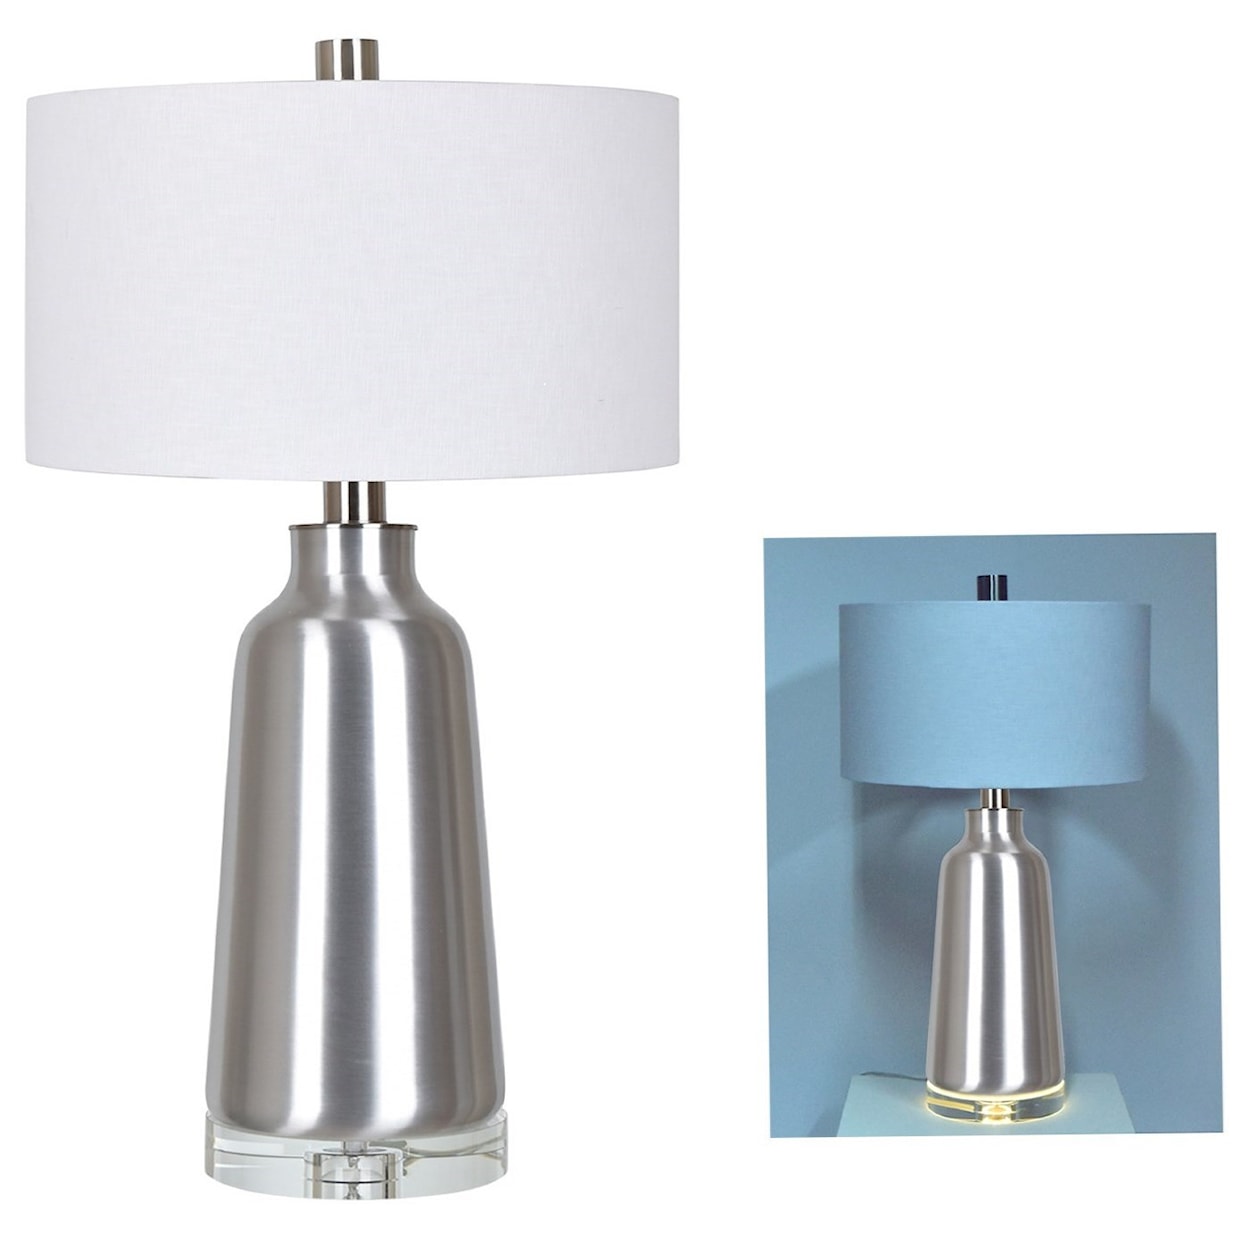 Crestview Collection Lighting Lane Table Lamp